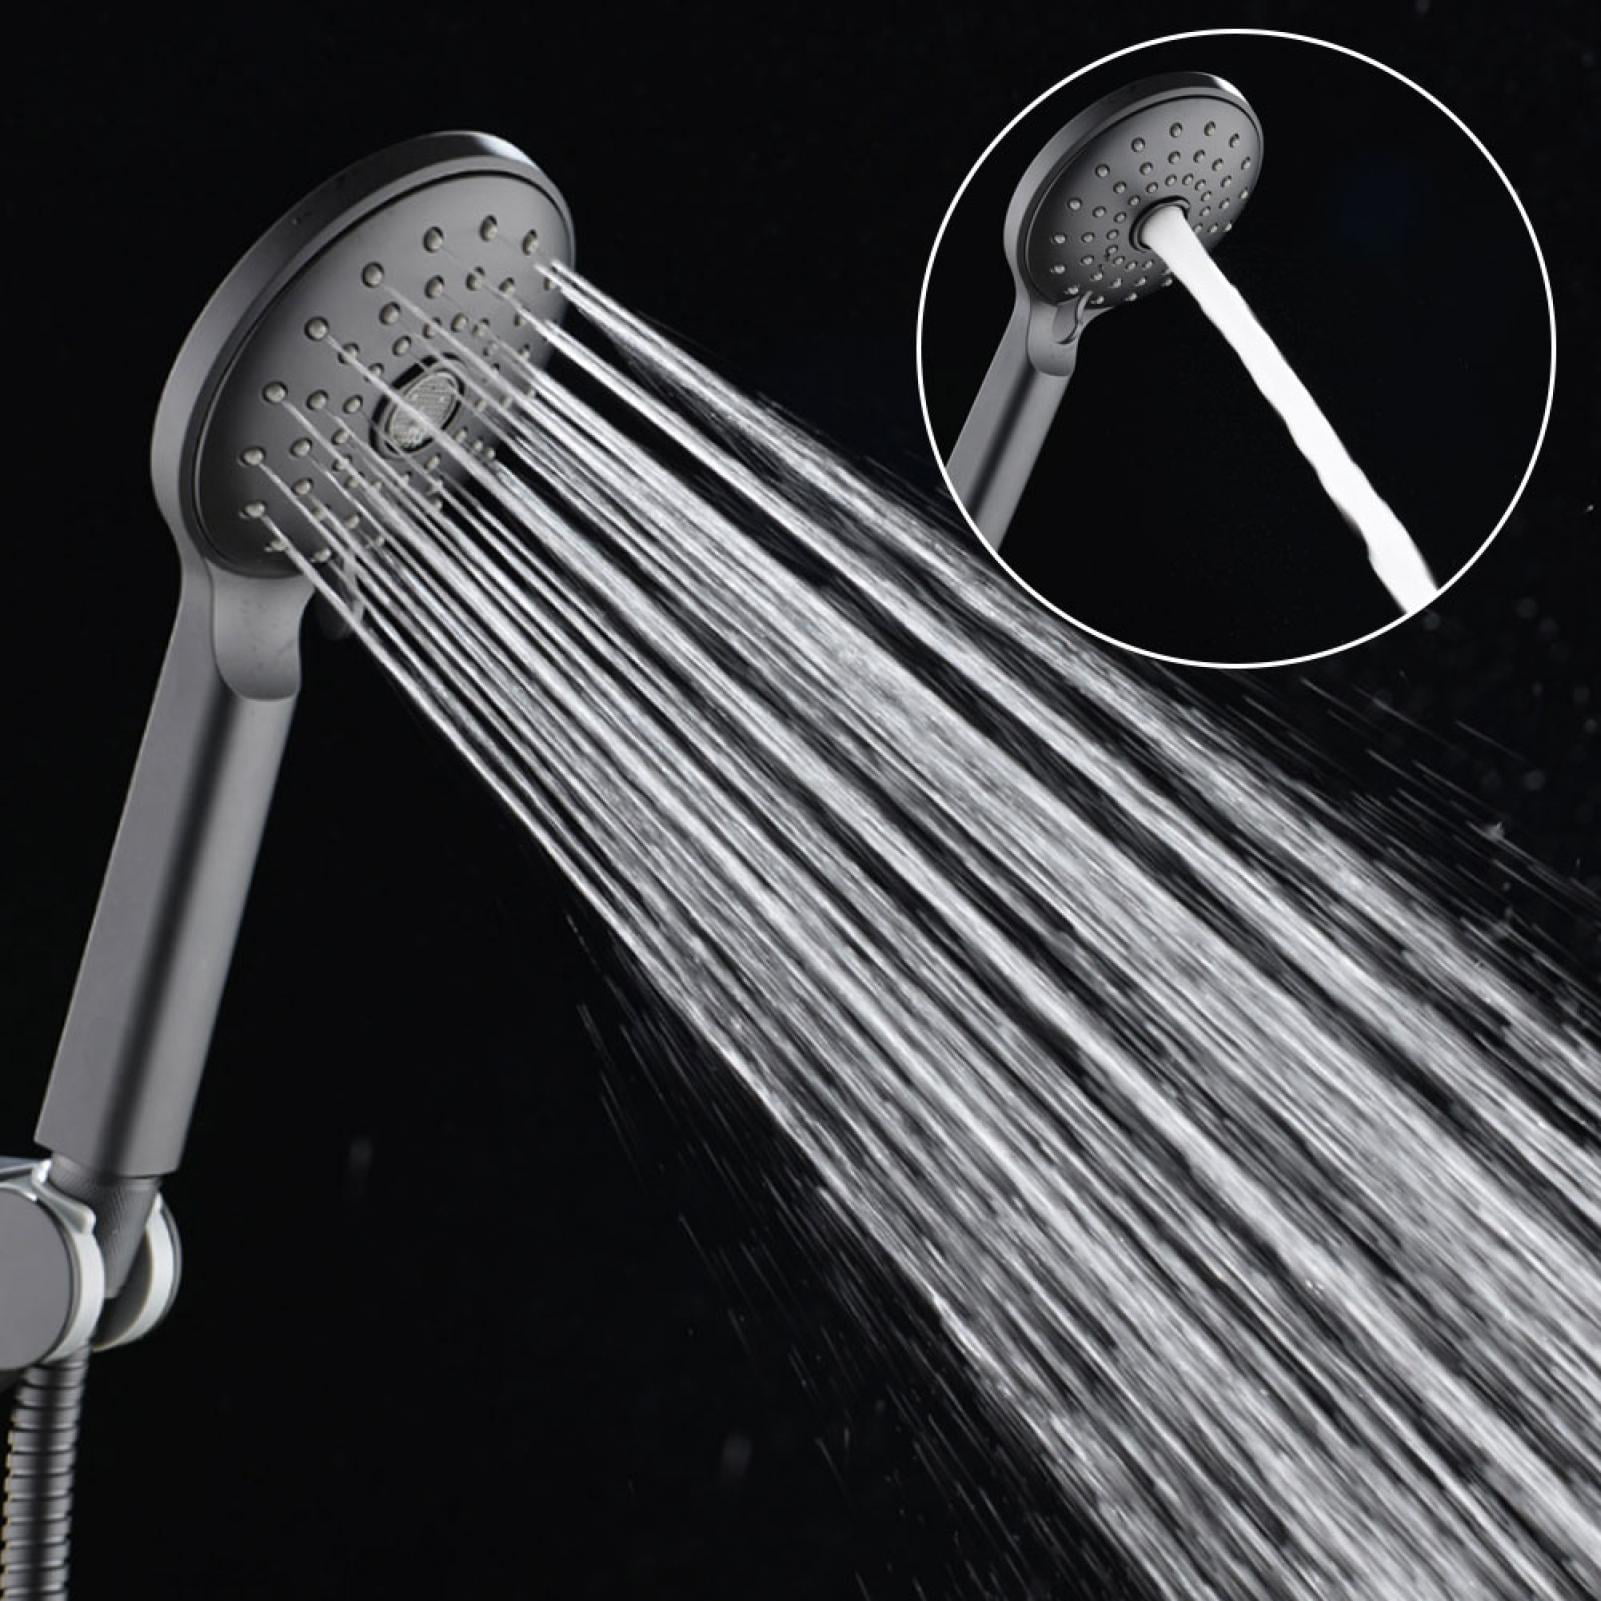 Details about   Shower Faucet Set Wall Mounted Single Handle Rain Black Three Outlets Mixer Taps 